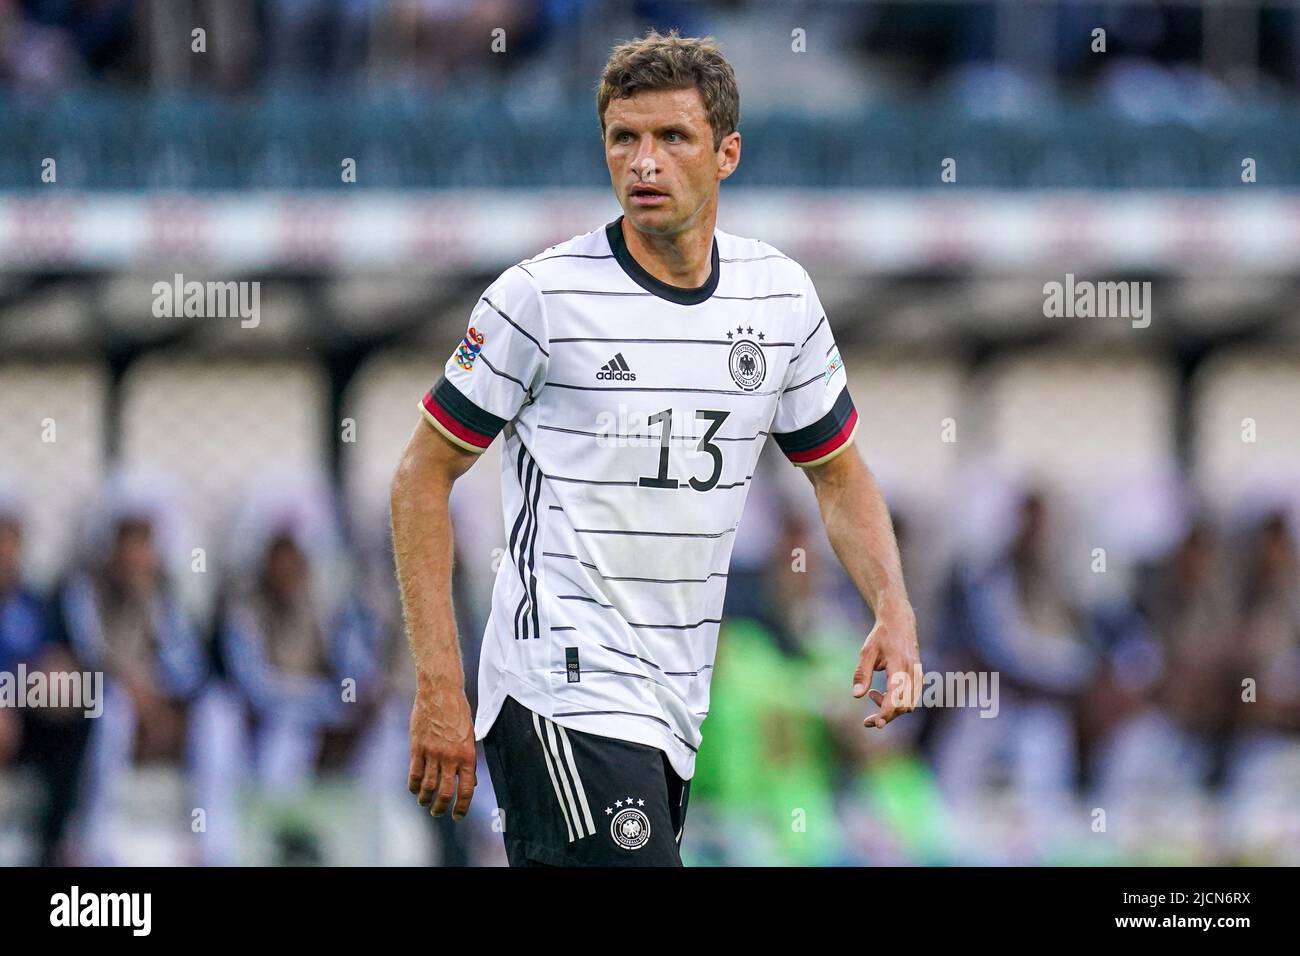 MöNCHENGLADBACH, GERMANY - JUNE 14: Thomas Muller of Germany during the UEFA Nations League match between Germany and Italy at Borussia-Park on June 14, 2022 in Mönchengladbach, Germany (Photo by Joris Verwijst/Orange Pictures) Stock Photo